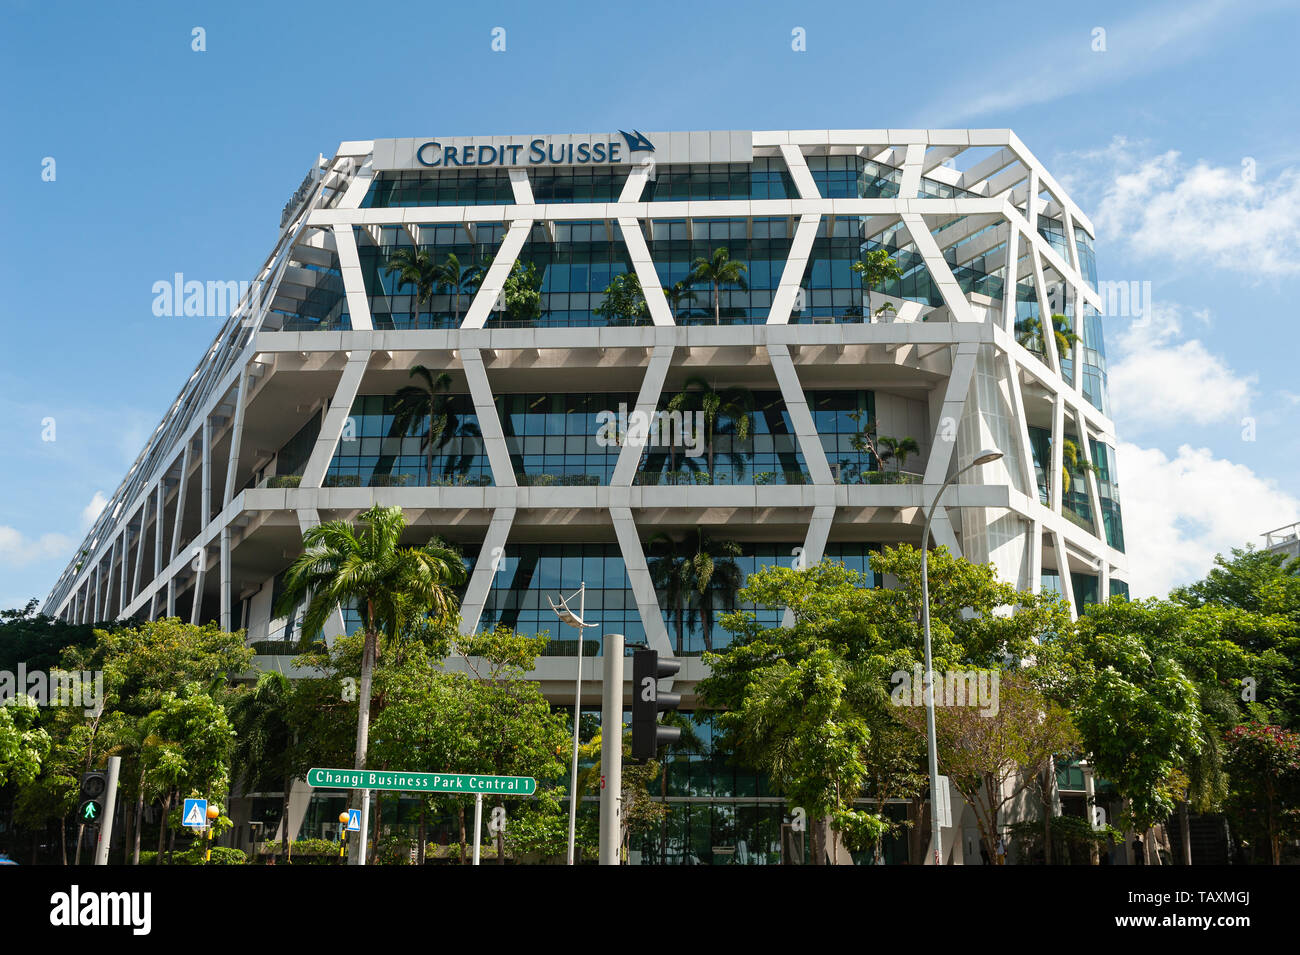 24.05.2019, Singapore, Republic of Singapore, Asia - Modern Credit Suisse bank building at Changi Business Park. Stock Photo